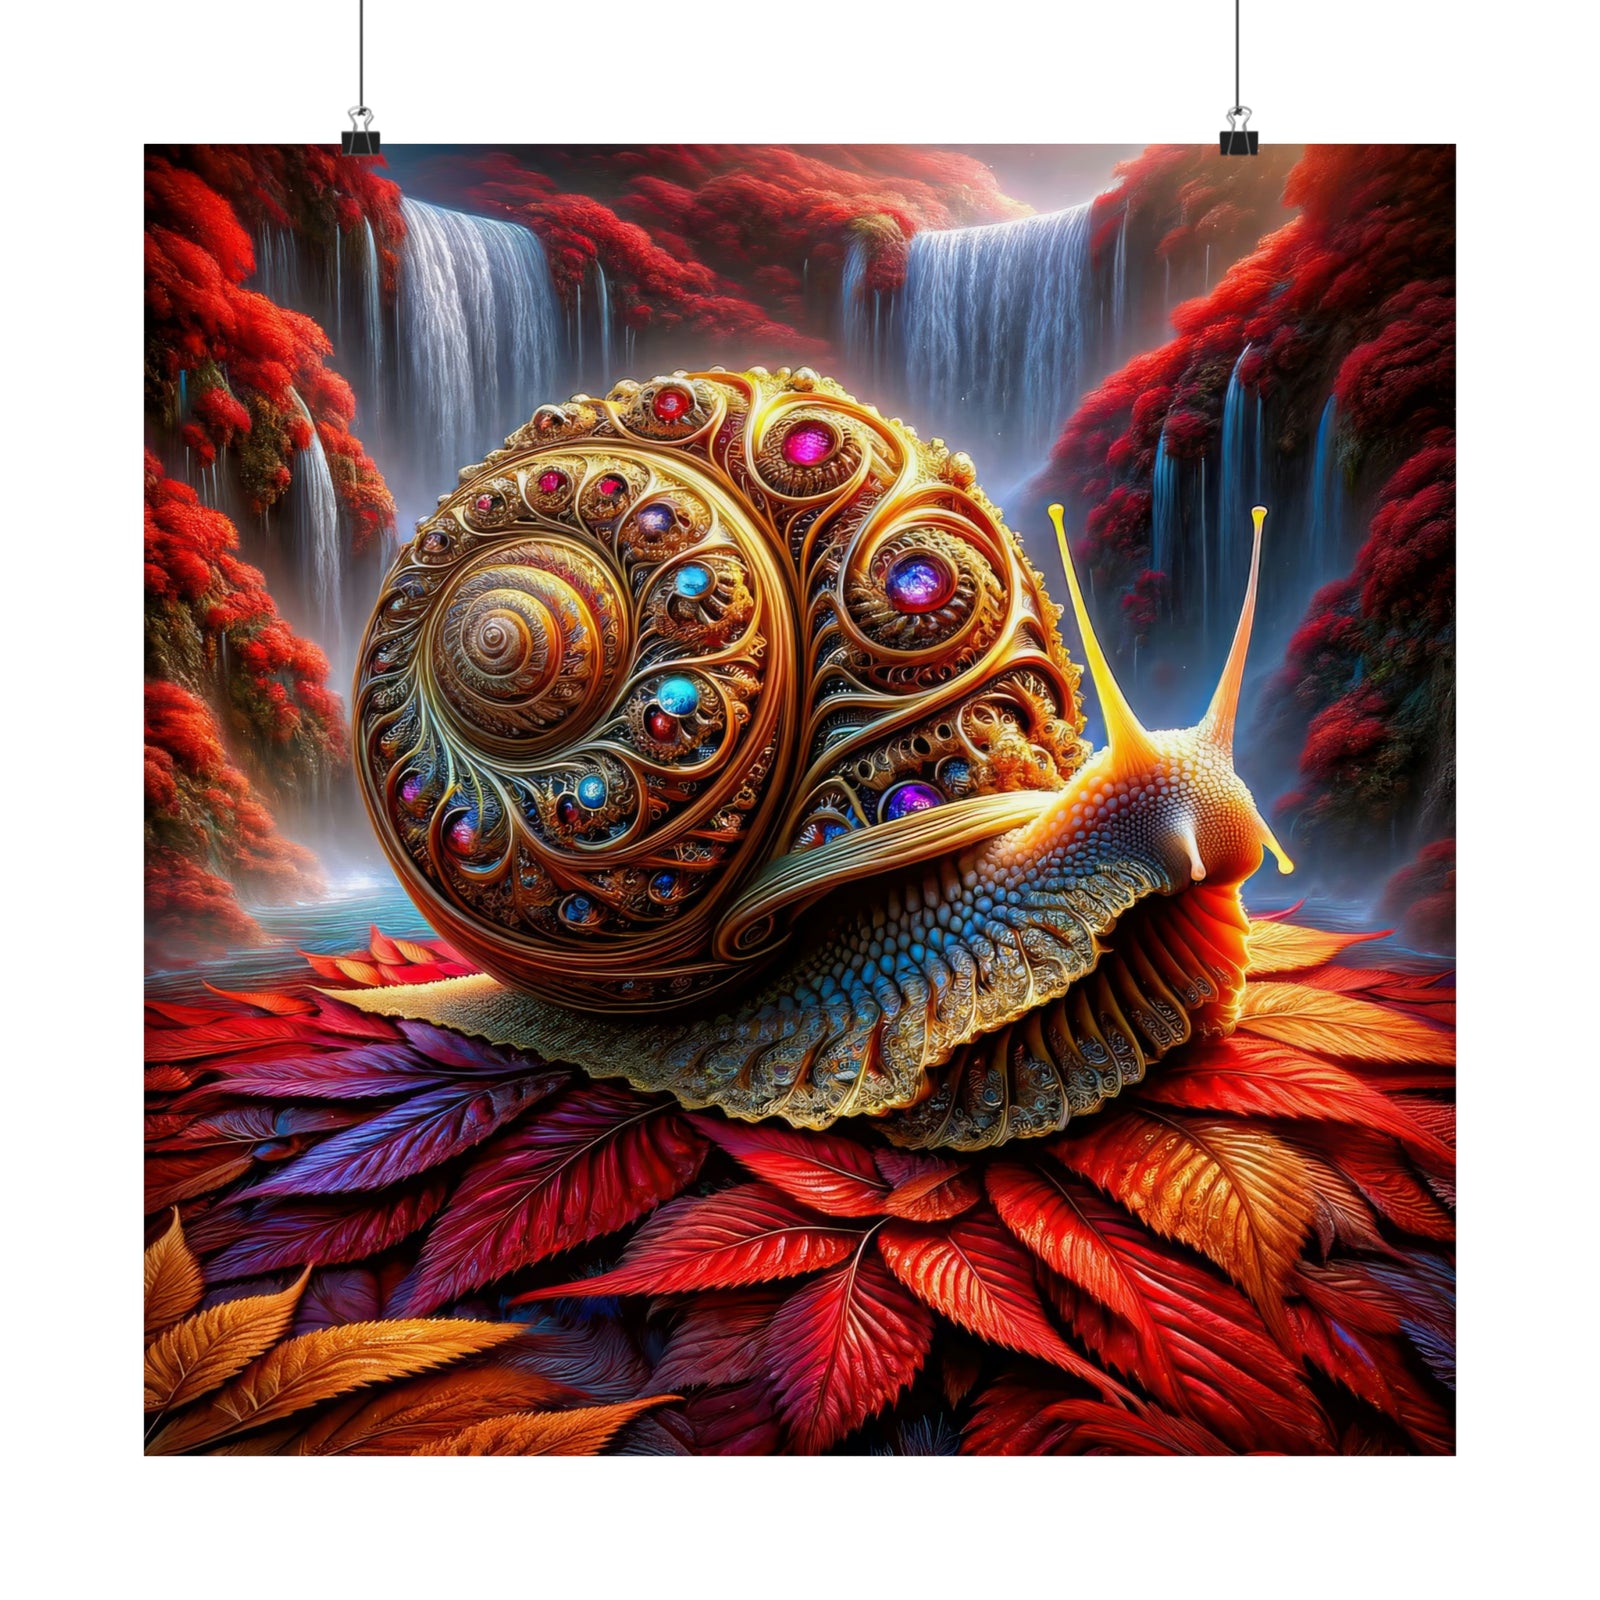 The Gilded Snail’s Odyssey Poster